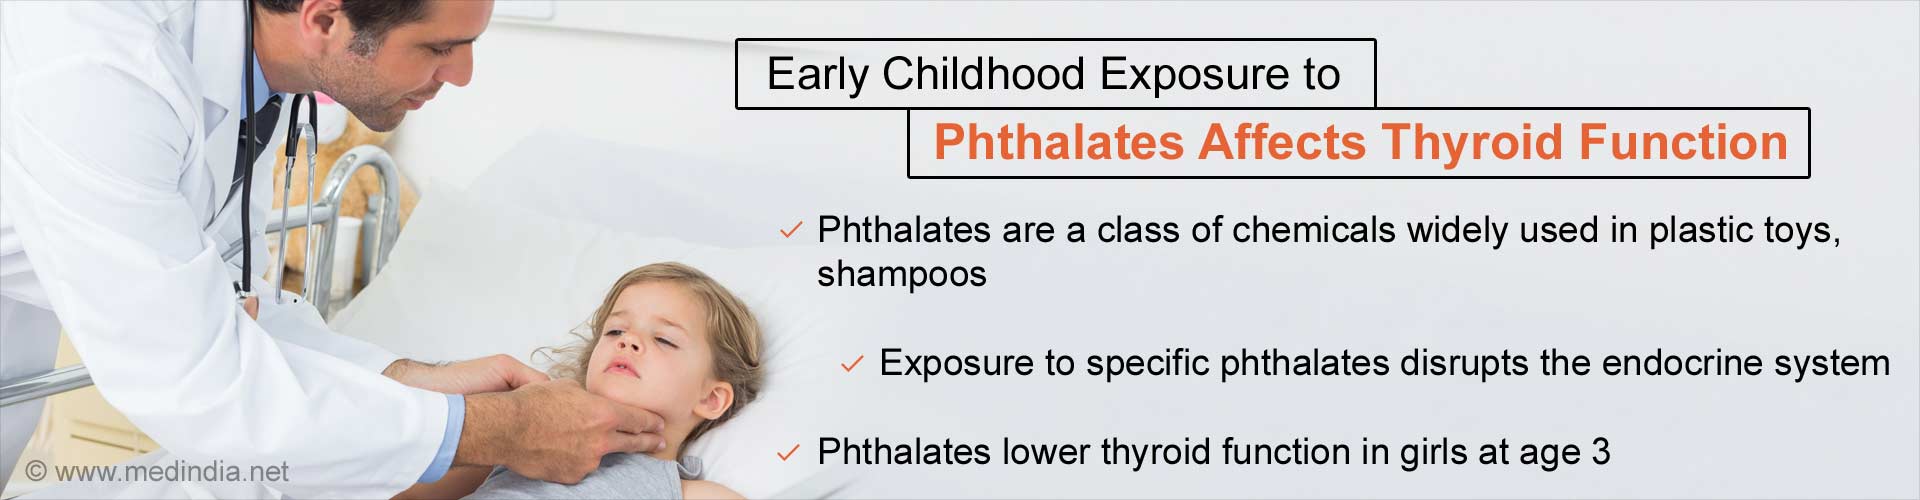 Early childhood exposure to Phthalates Affects Thyroid Function
- Phthalates are a class of chemicals widely used in plastic toys, shampoos
- Exposure to specific phthalate disrupts the endo system
- Phthalate lower thyroid function in girls at age 3